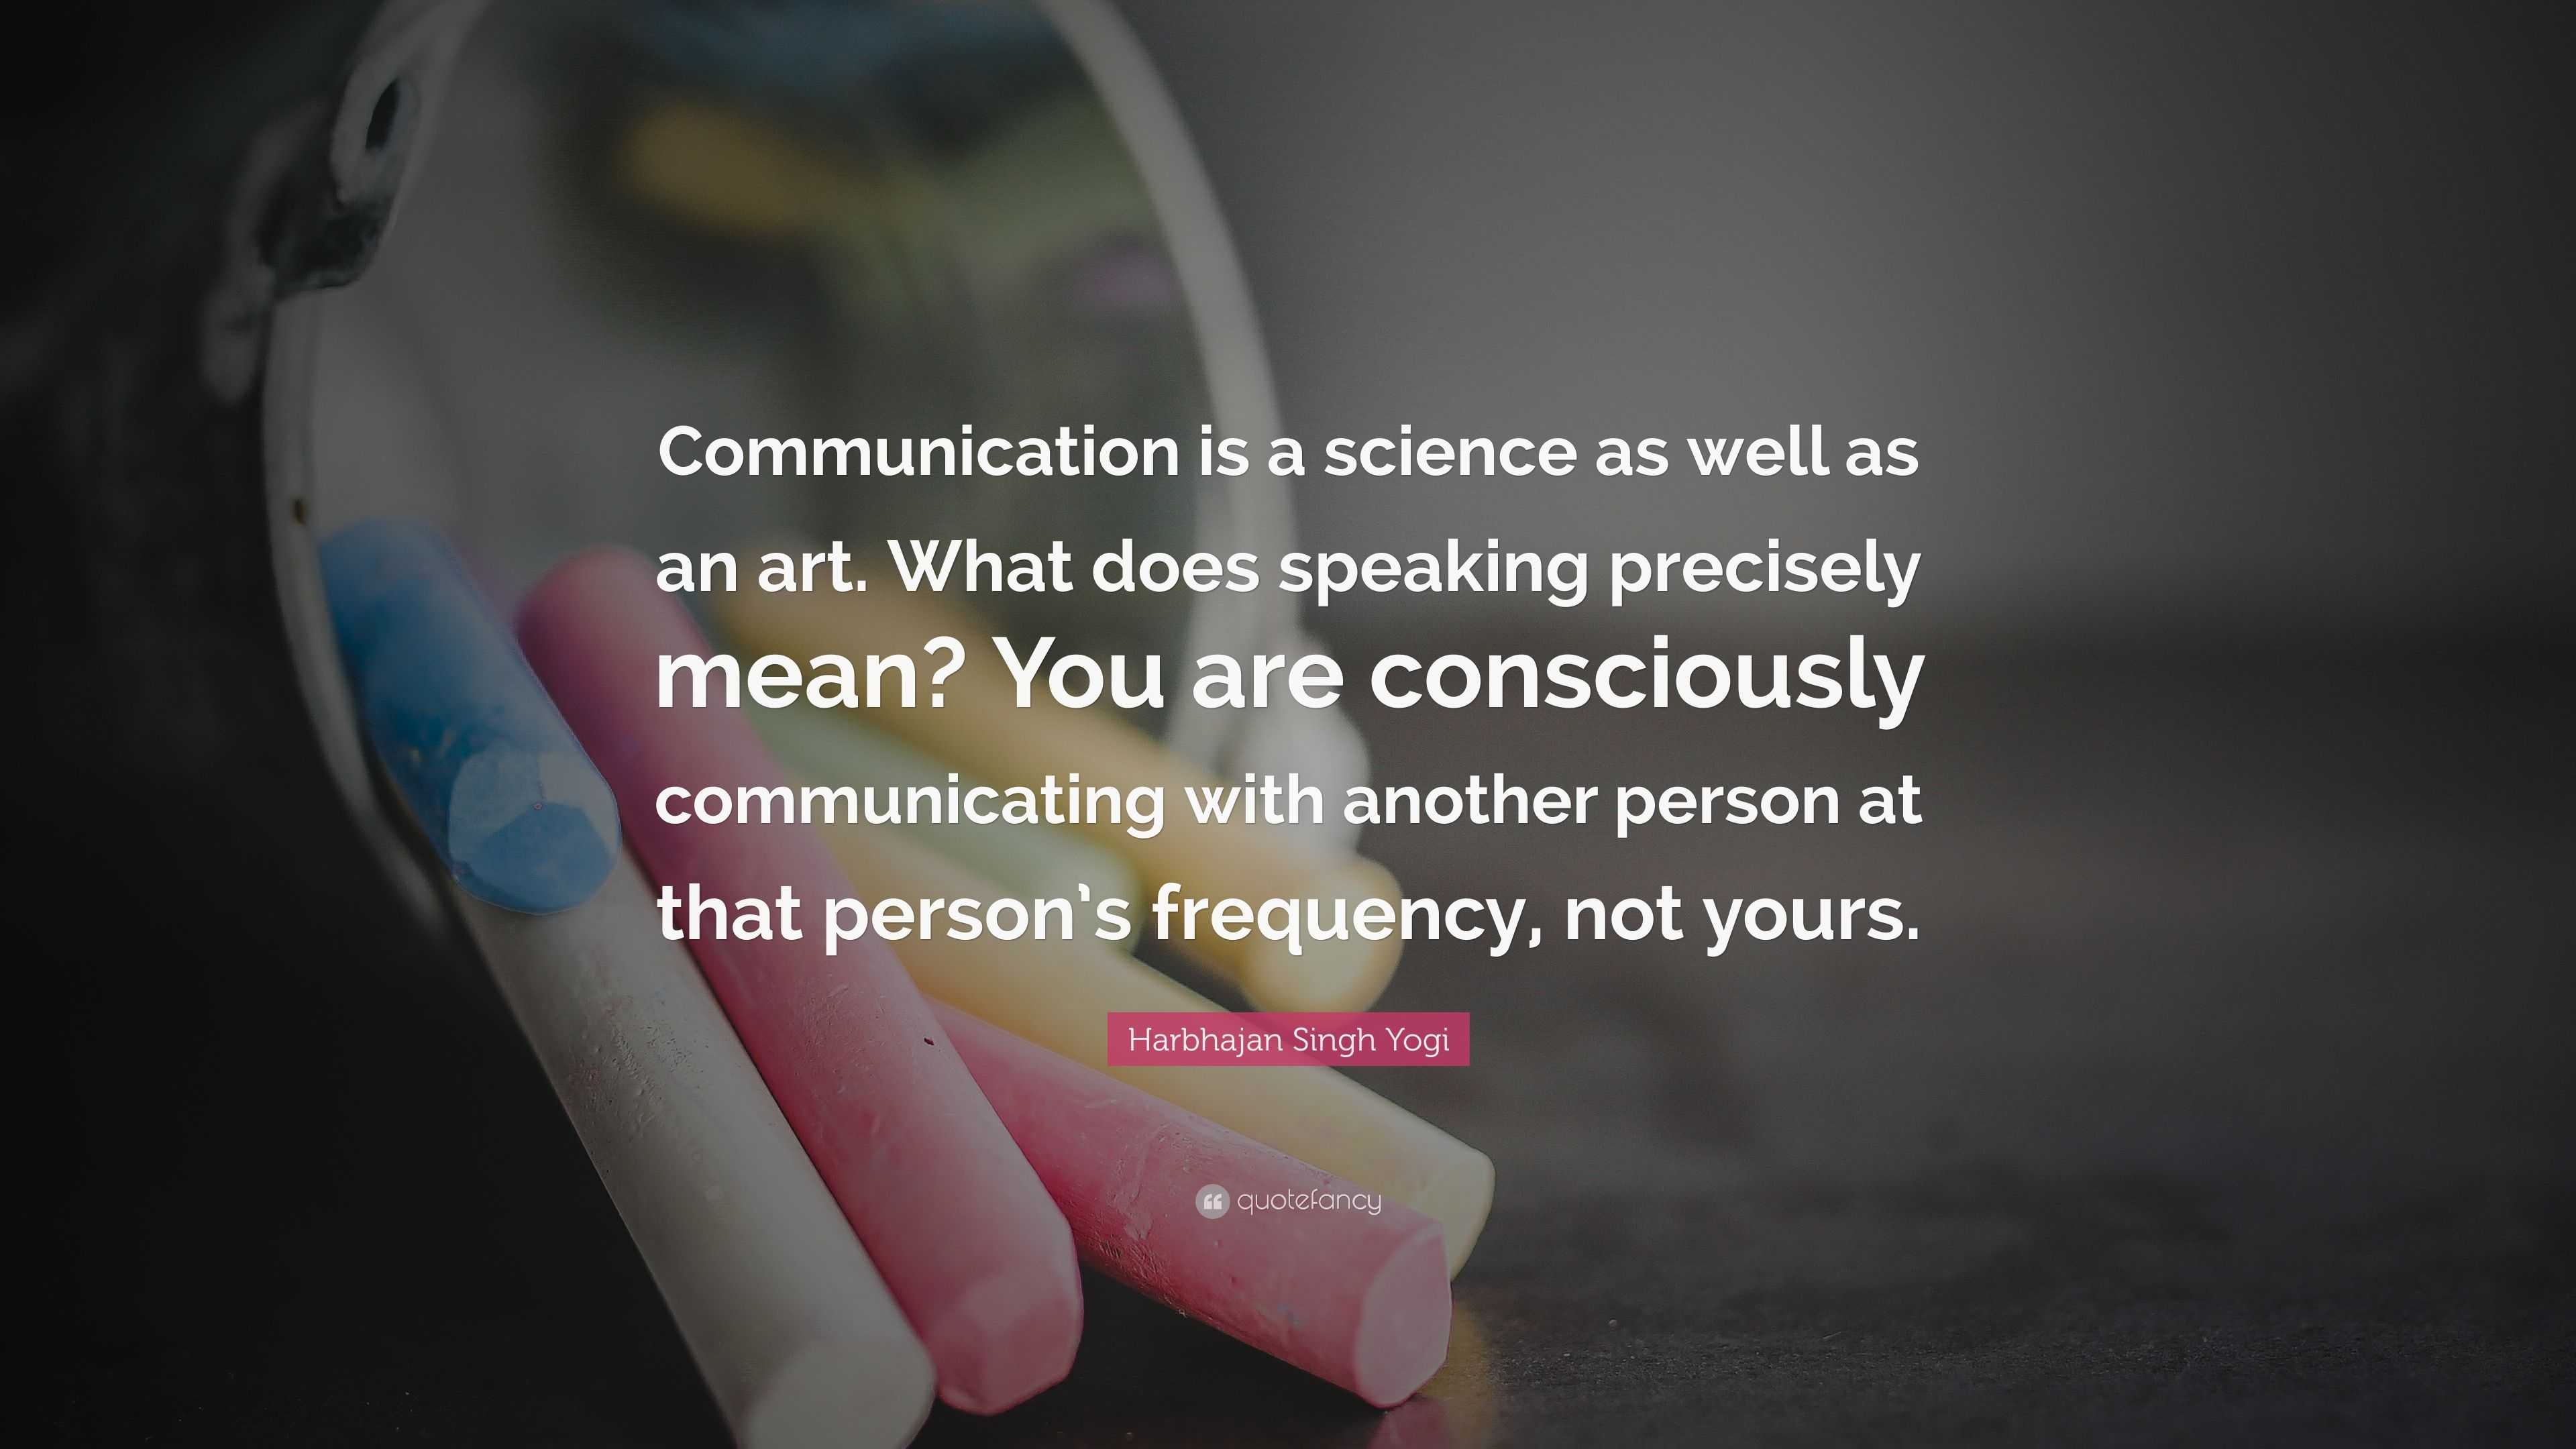 is communication a science or an art